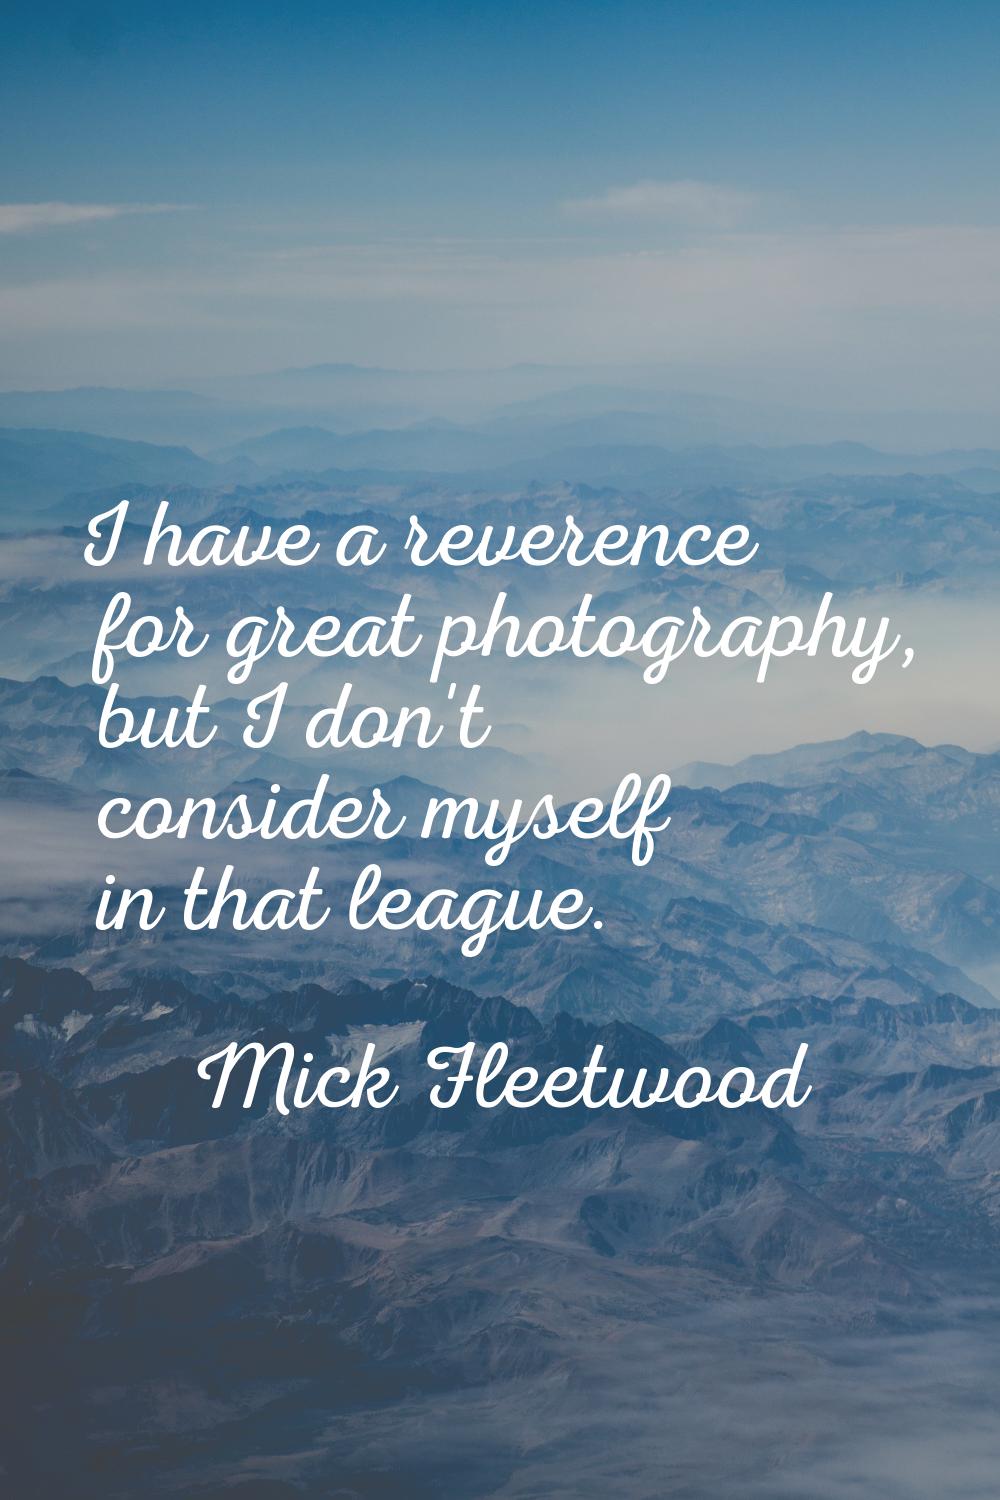 I have a reverence for great photography, but I don't consider myself in that league.